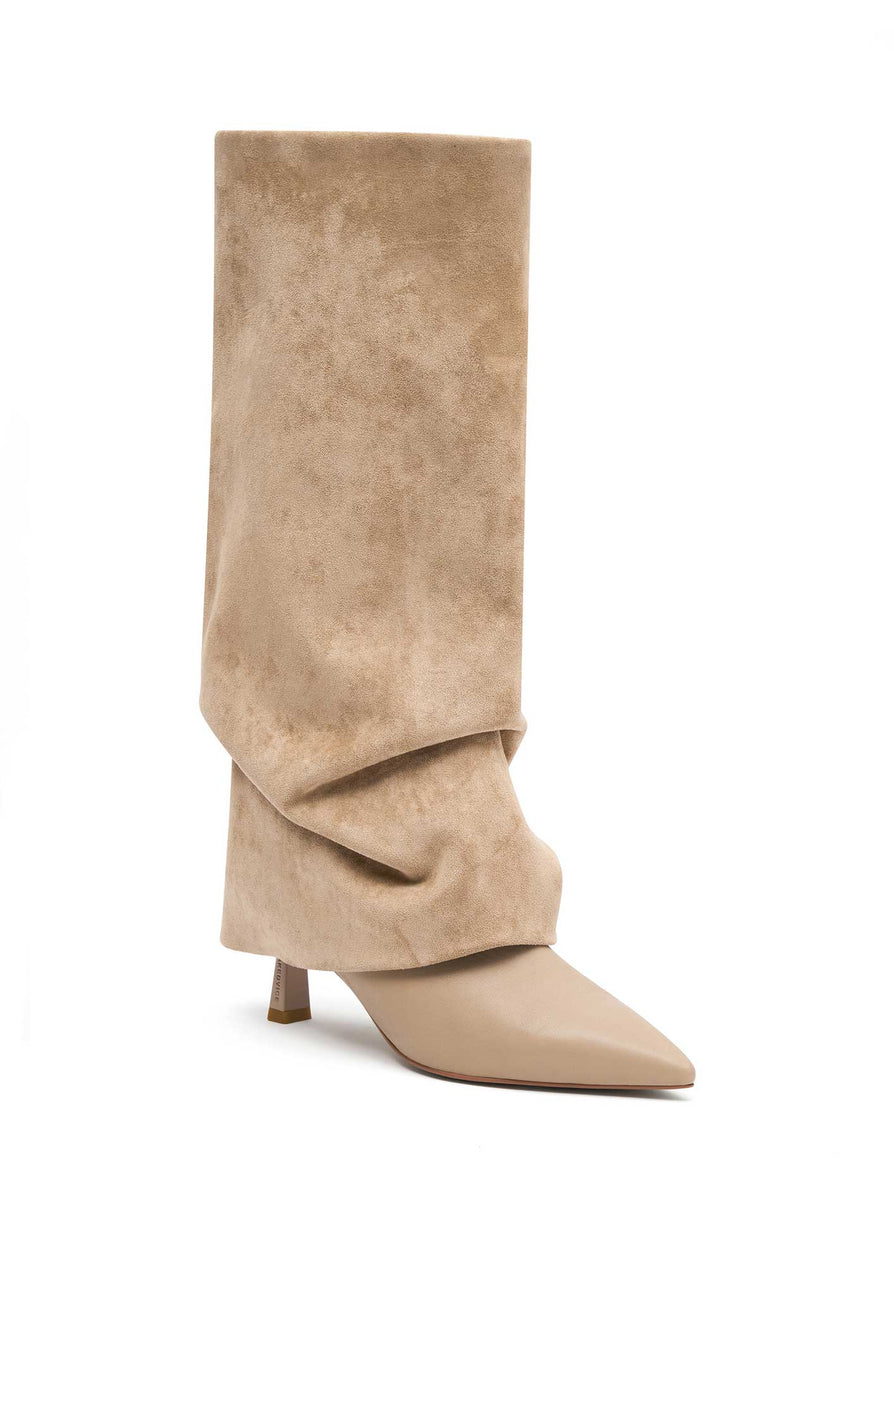 THE SIA SAND BOOT | ghost